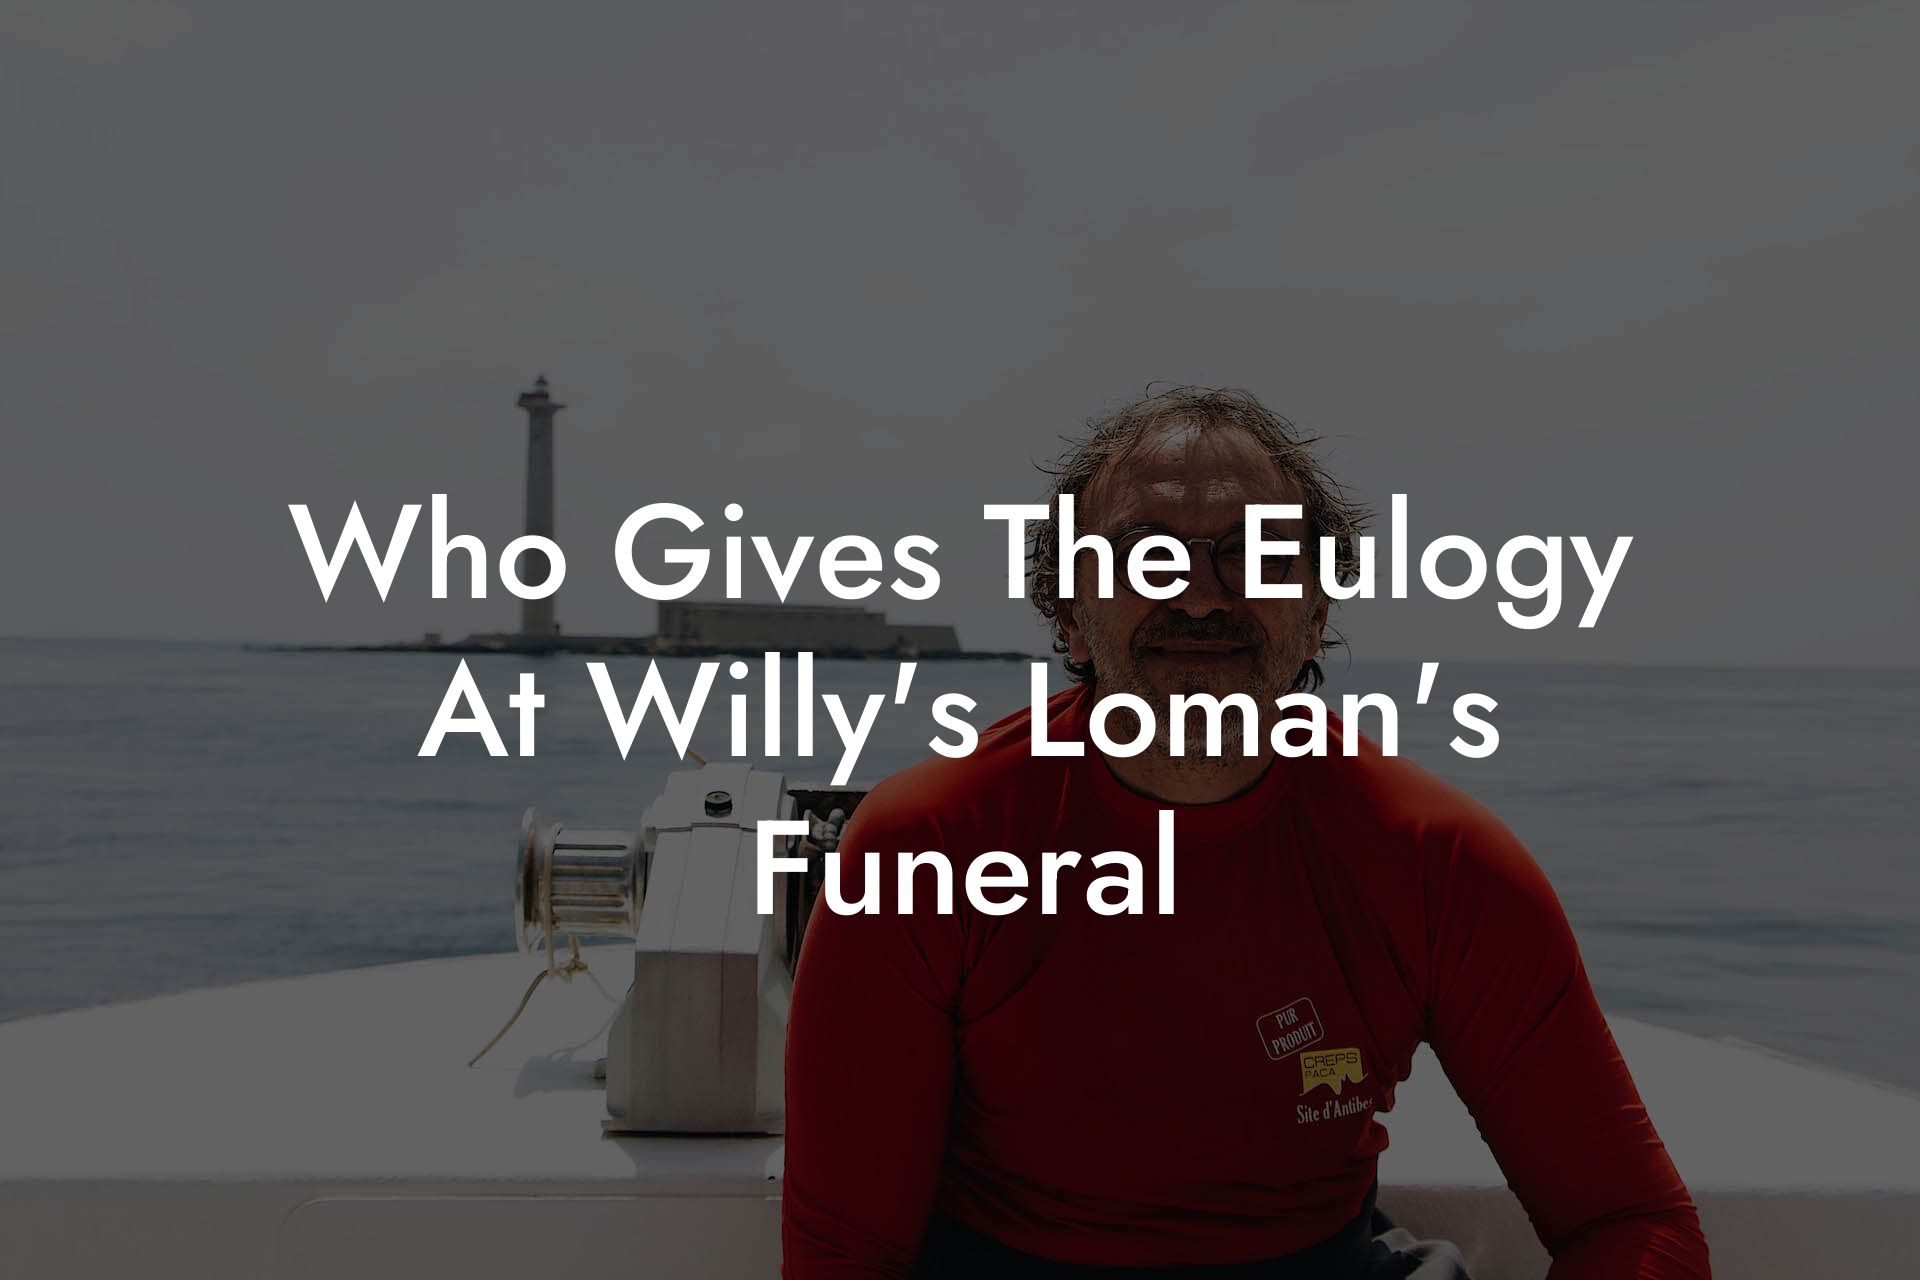 Who Gives The Eulogy At Willy's Loman's Funeral